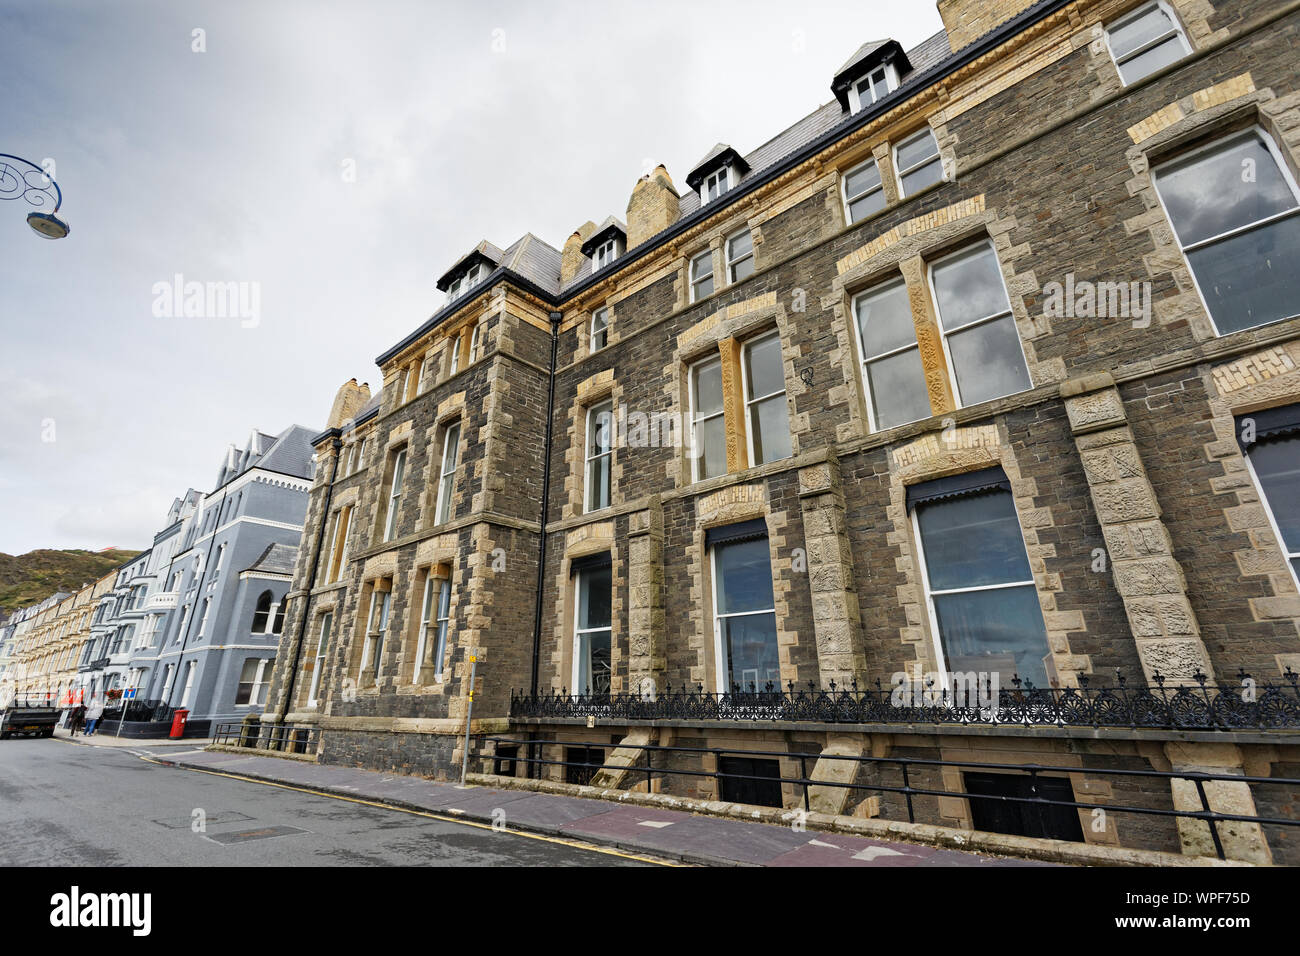 Pictured: Front view of the old Police Station in Aberystwyth, Wales, UK. Wednesday 28 August 2019 Re: Opened 1866, built by the Hafod Hotel Co as the Stock Photo